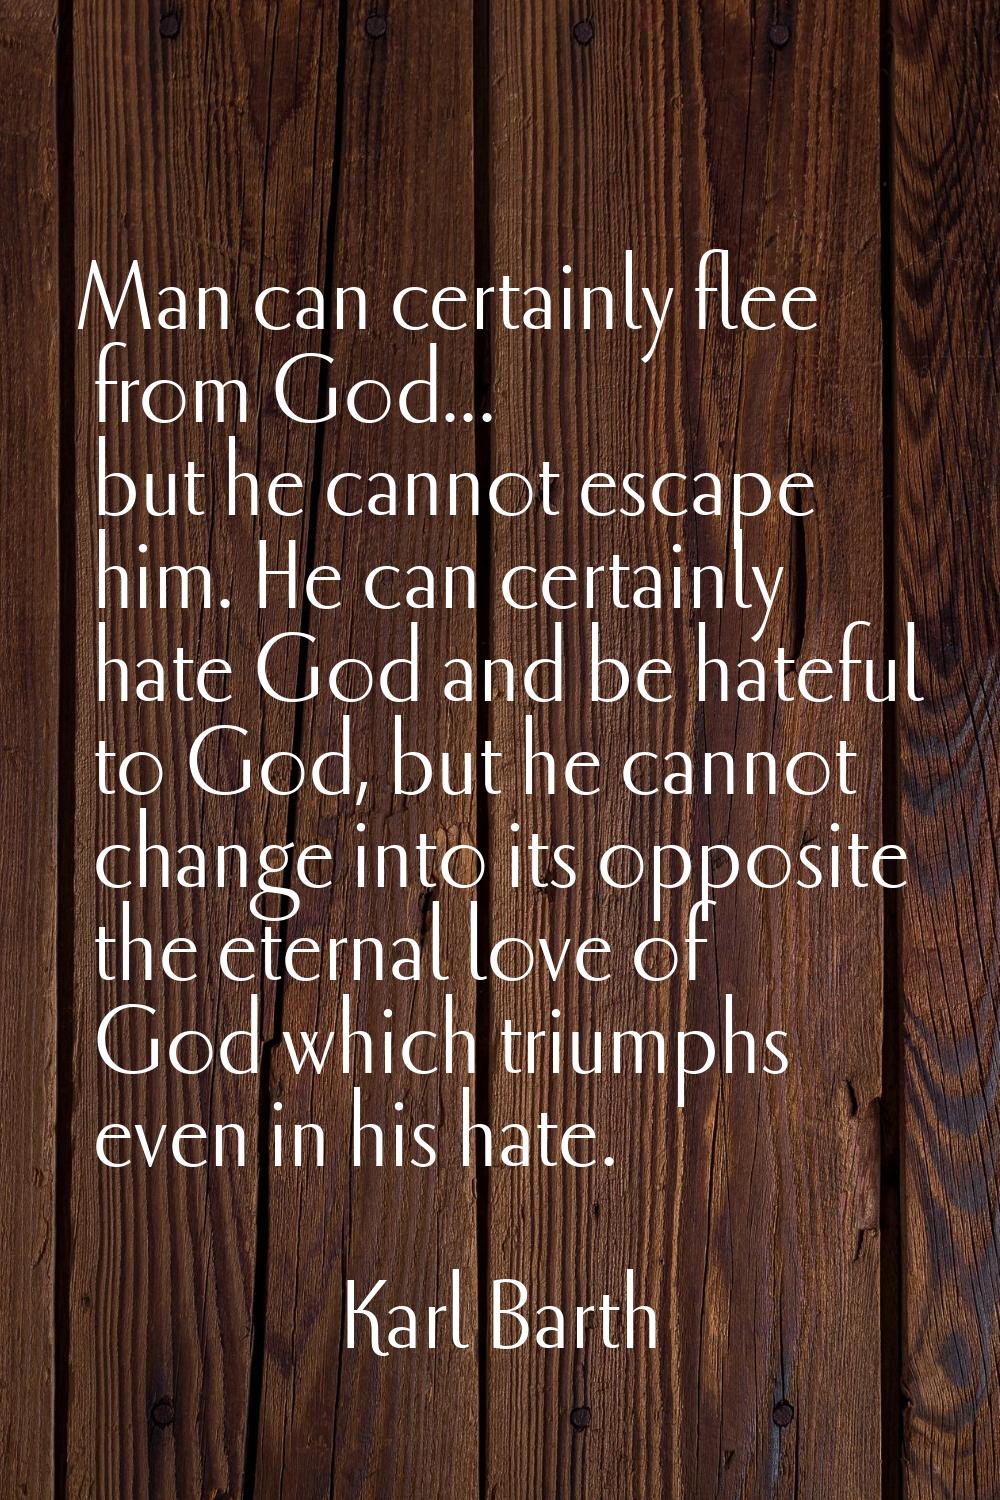 Man can certainly flee from God... but he cannot escape him. He can certainly hate God and be hatef